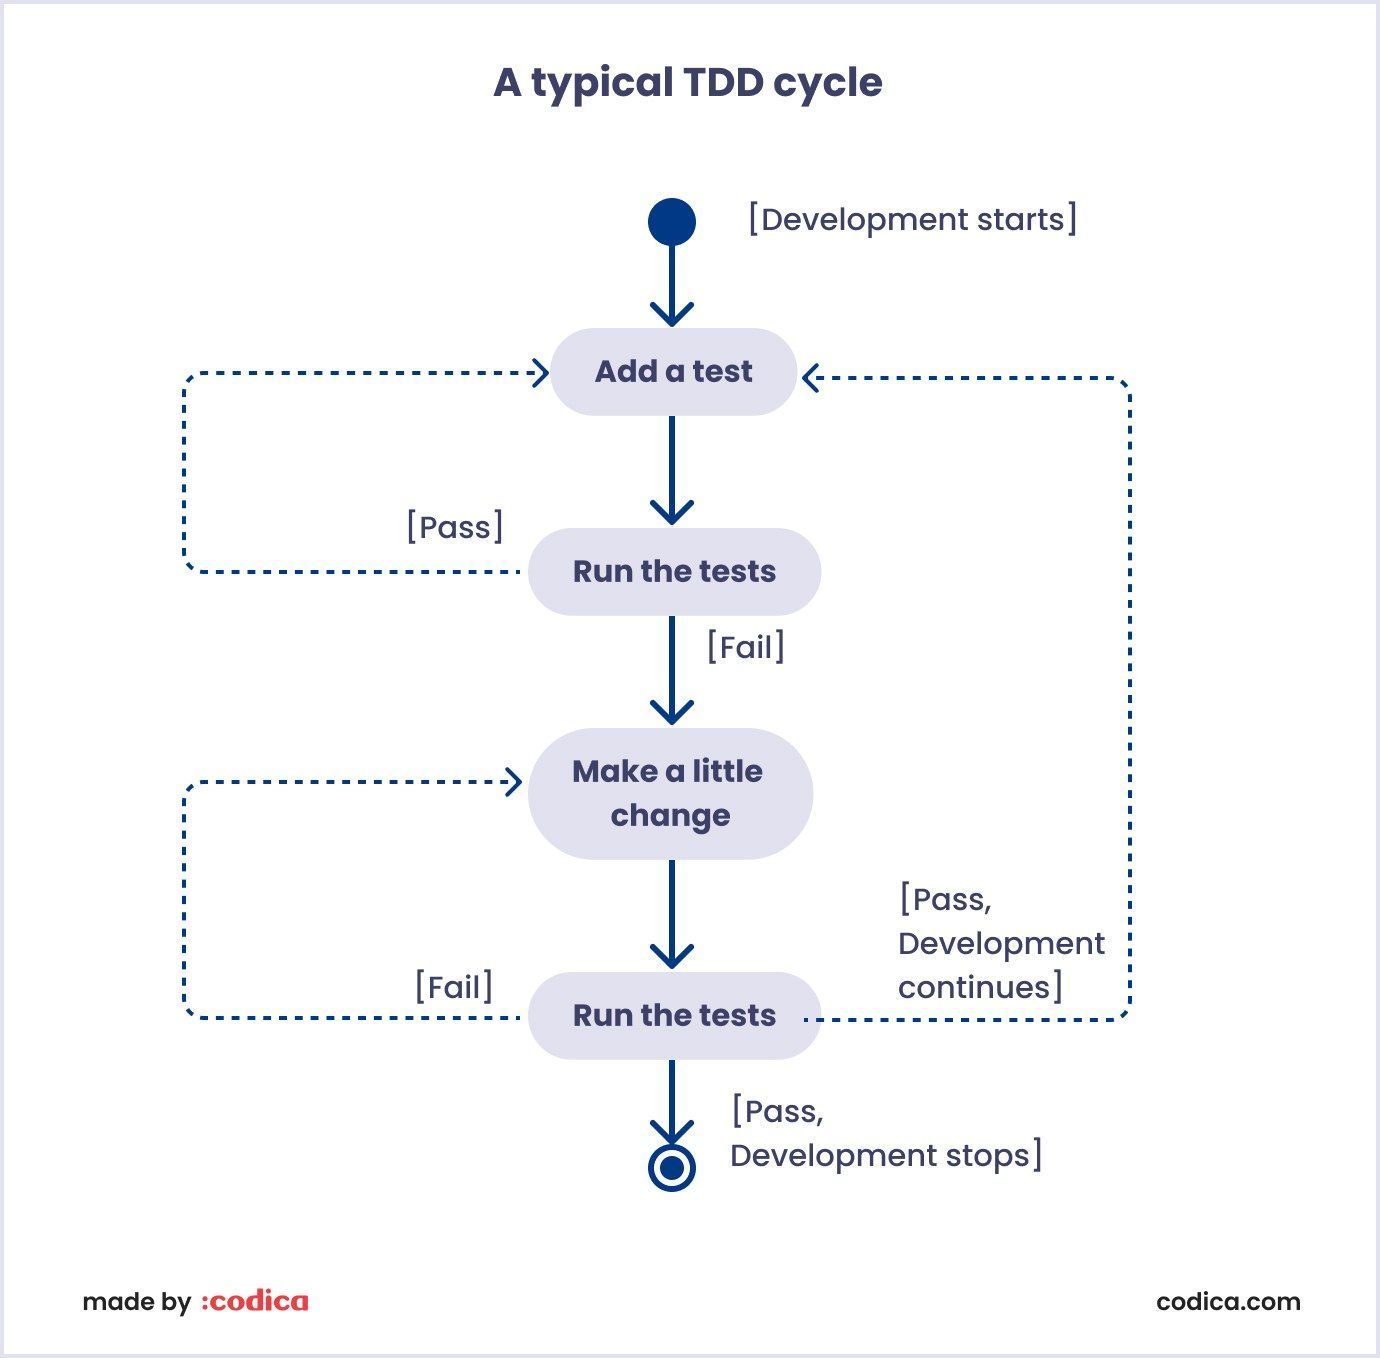 A typical TDD cycle